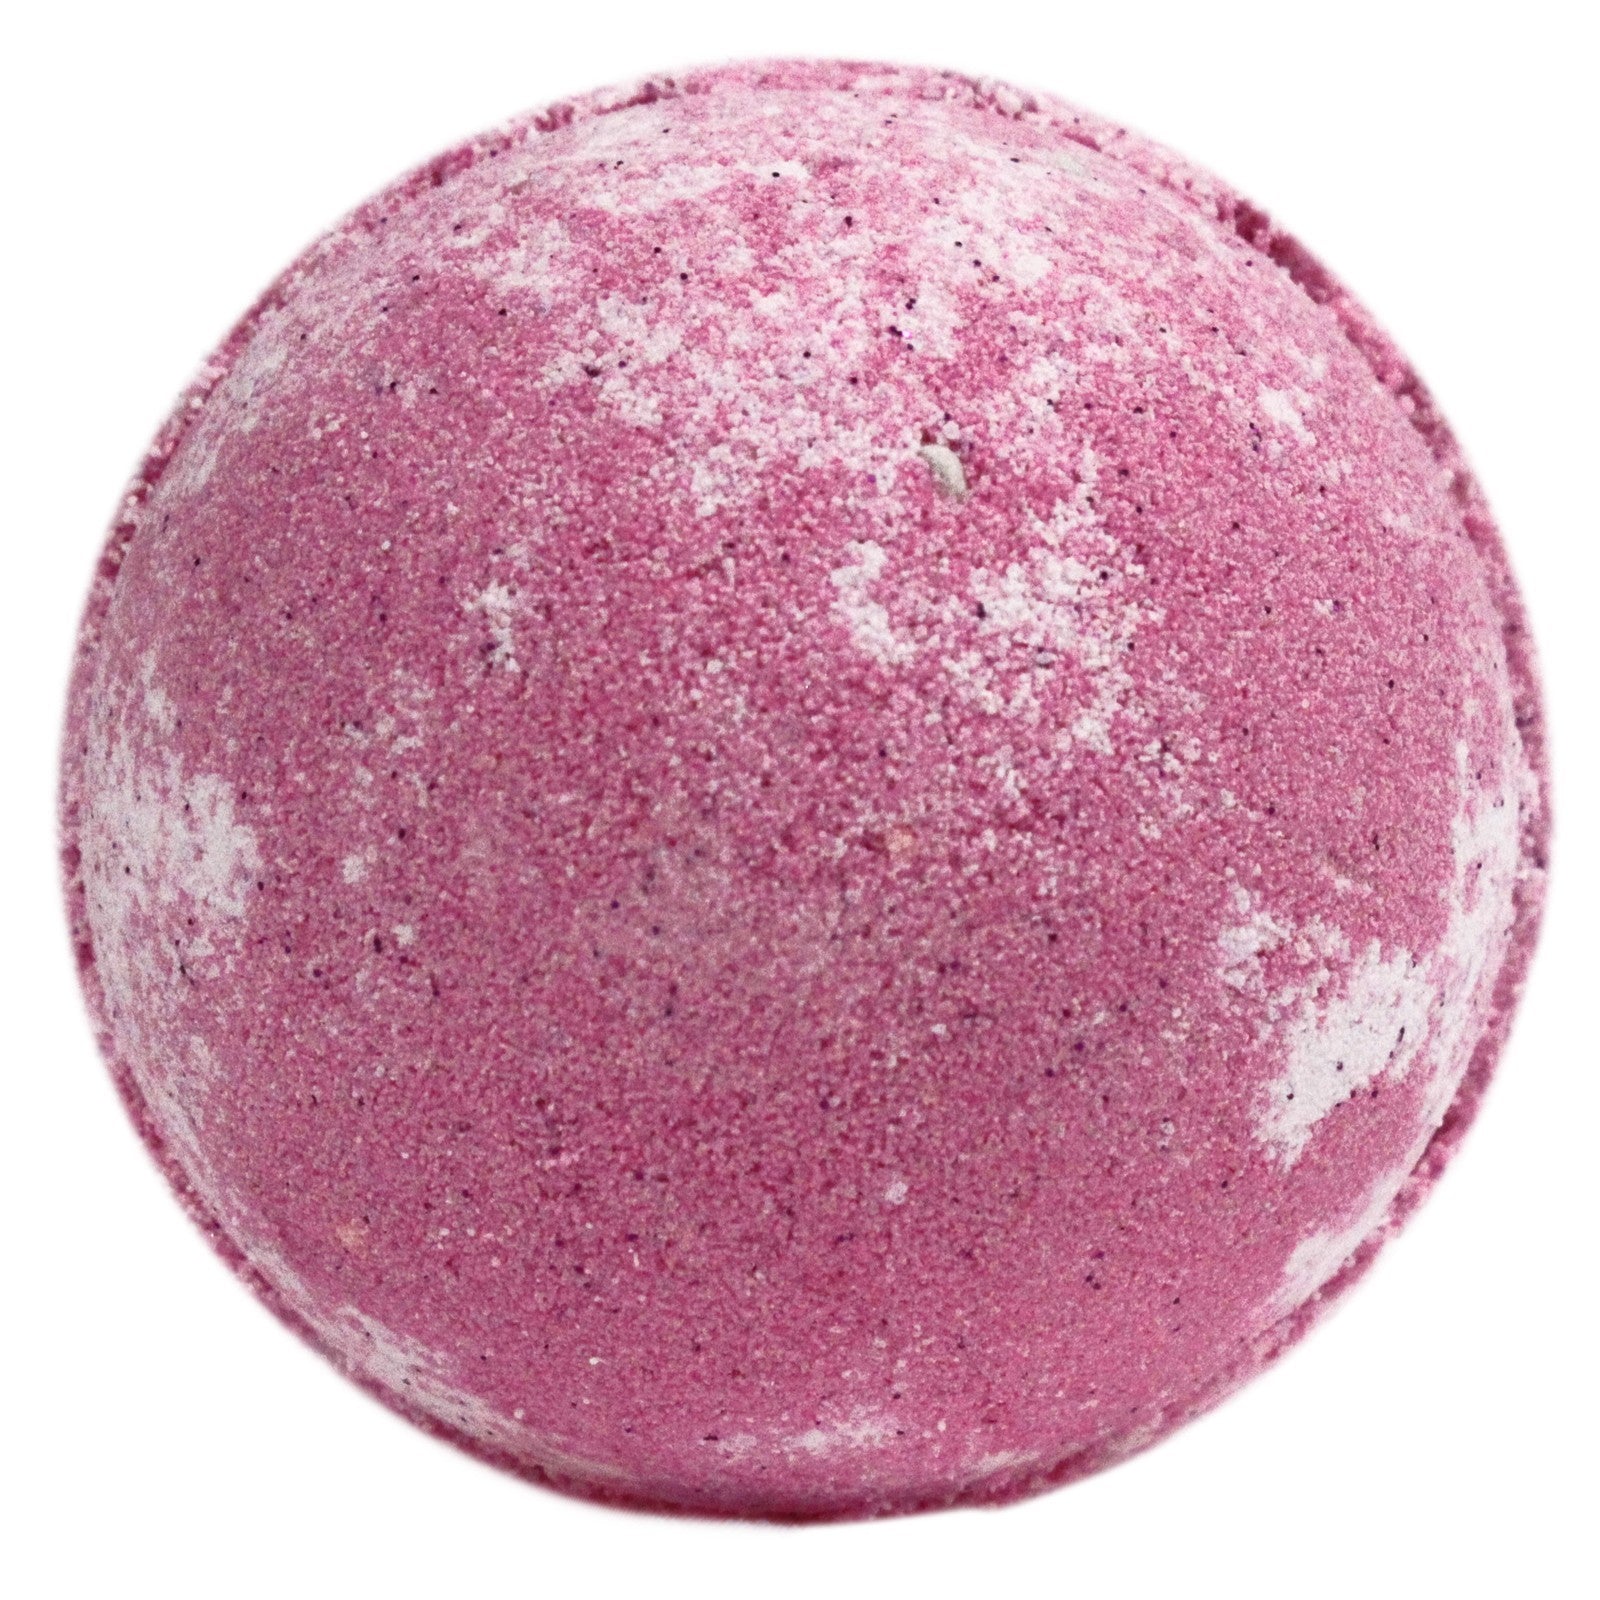 View Party Girl Bath Bomb information